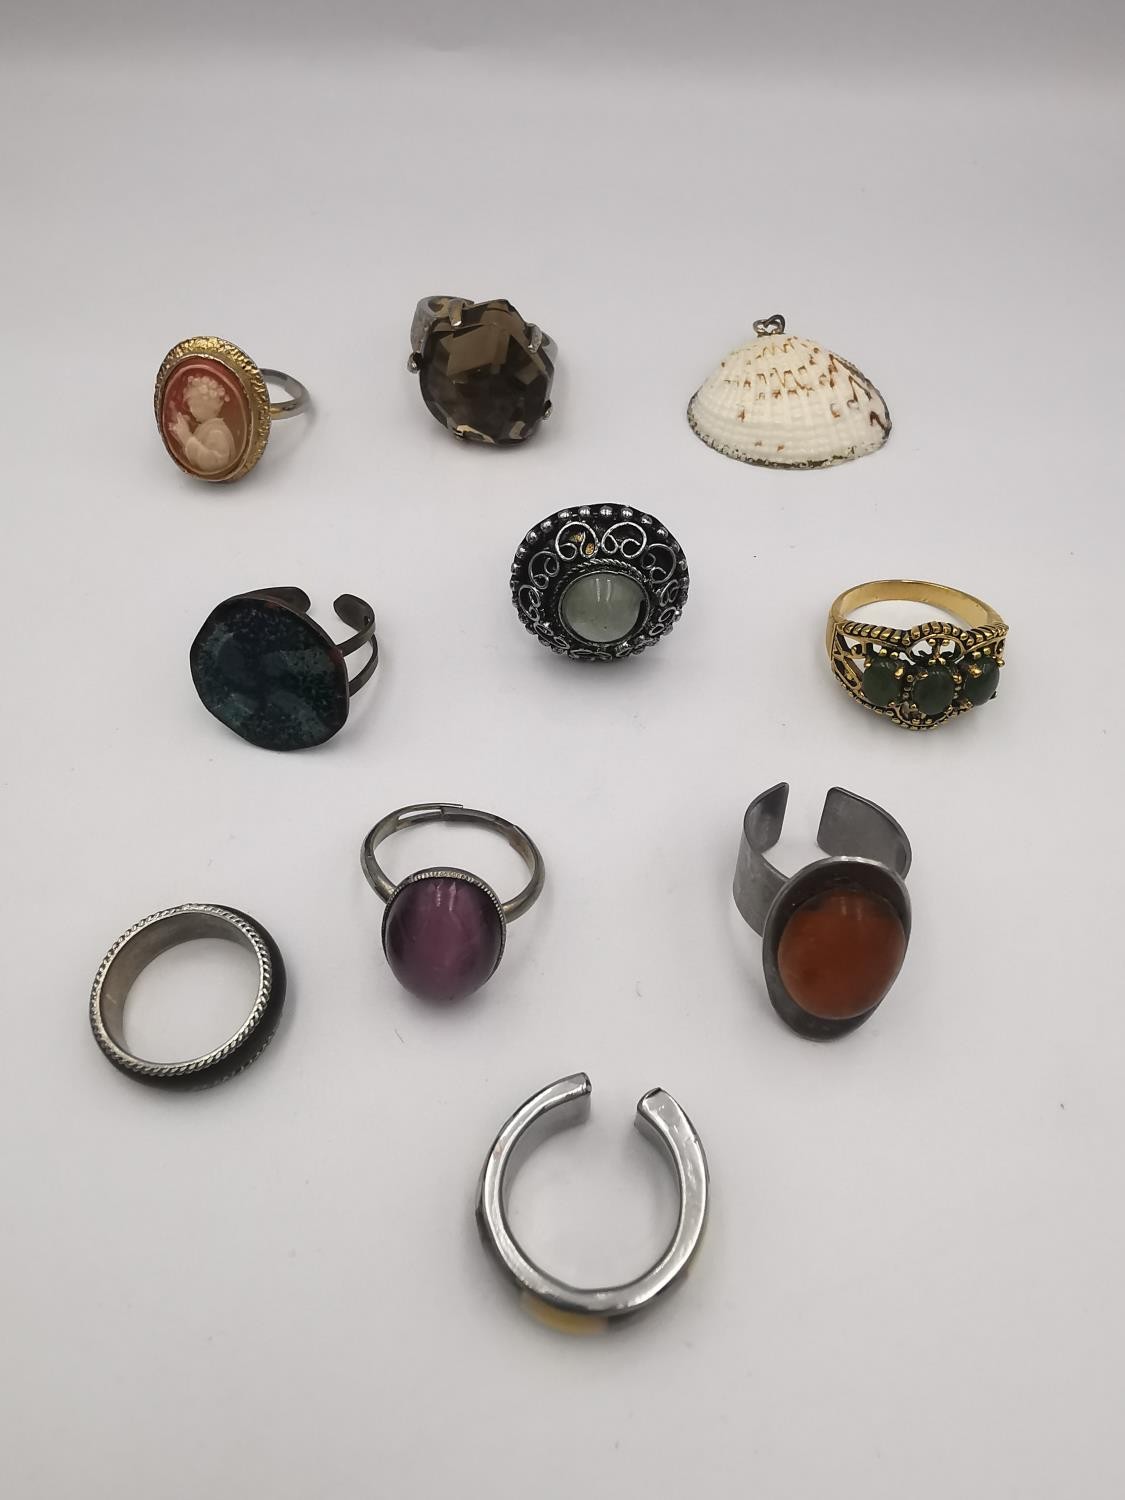 A large collection of vintage and antique rings of various designs. - Image 5 of 7